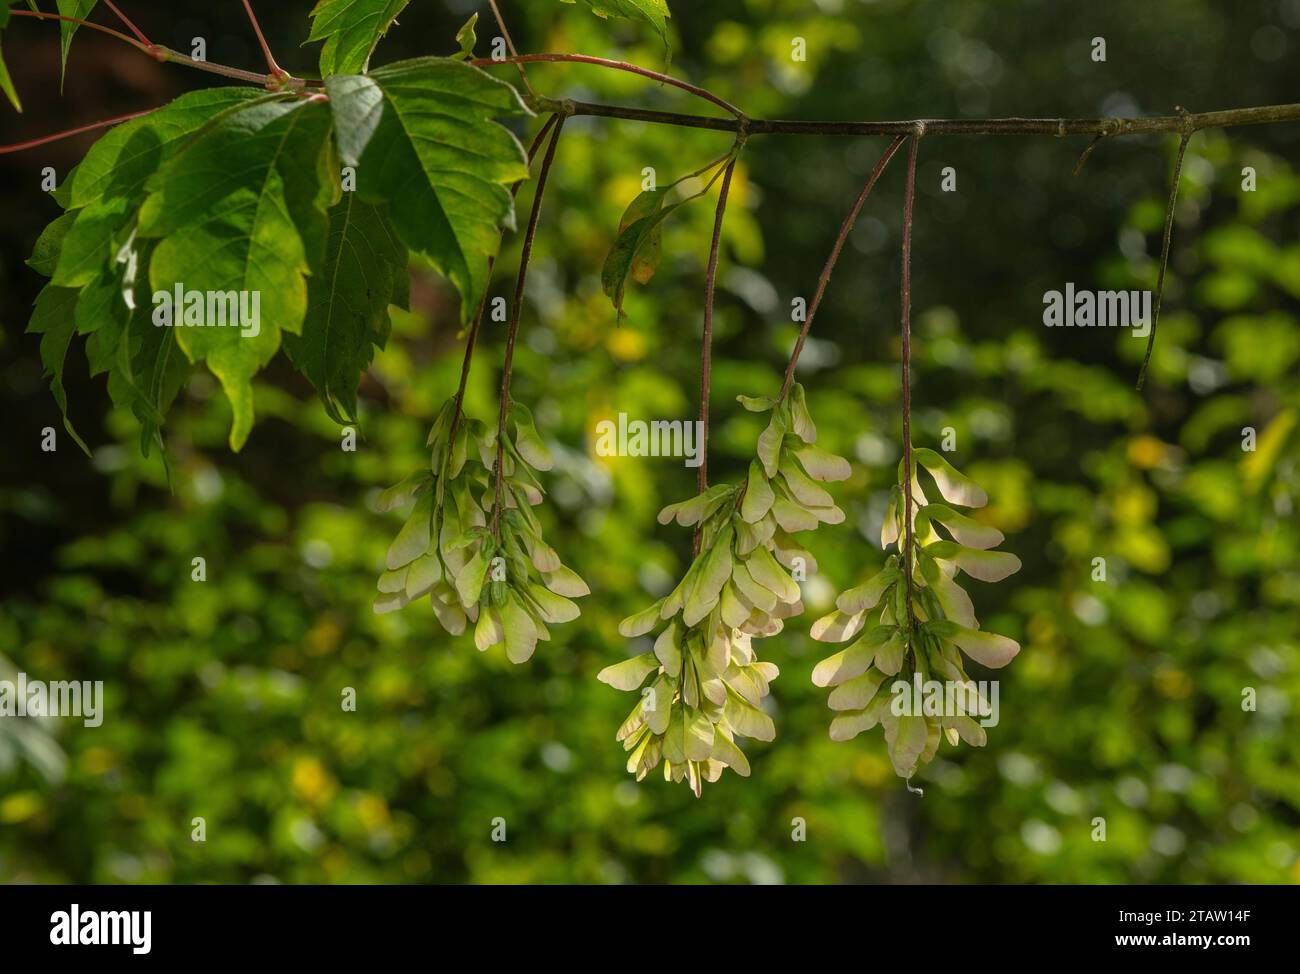 Vine-leafed maple, Acer cissifolium, in fruit in autumn, from Japan. Stock Photo